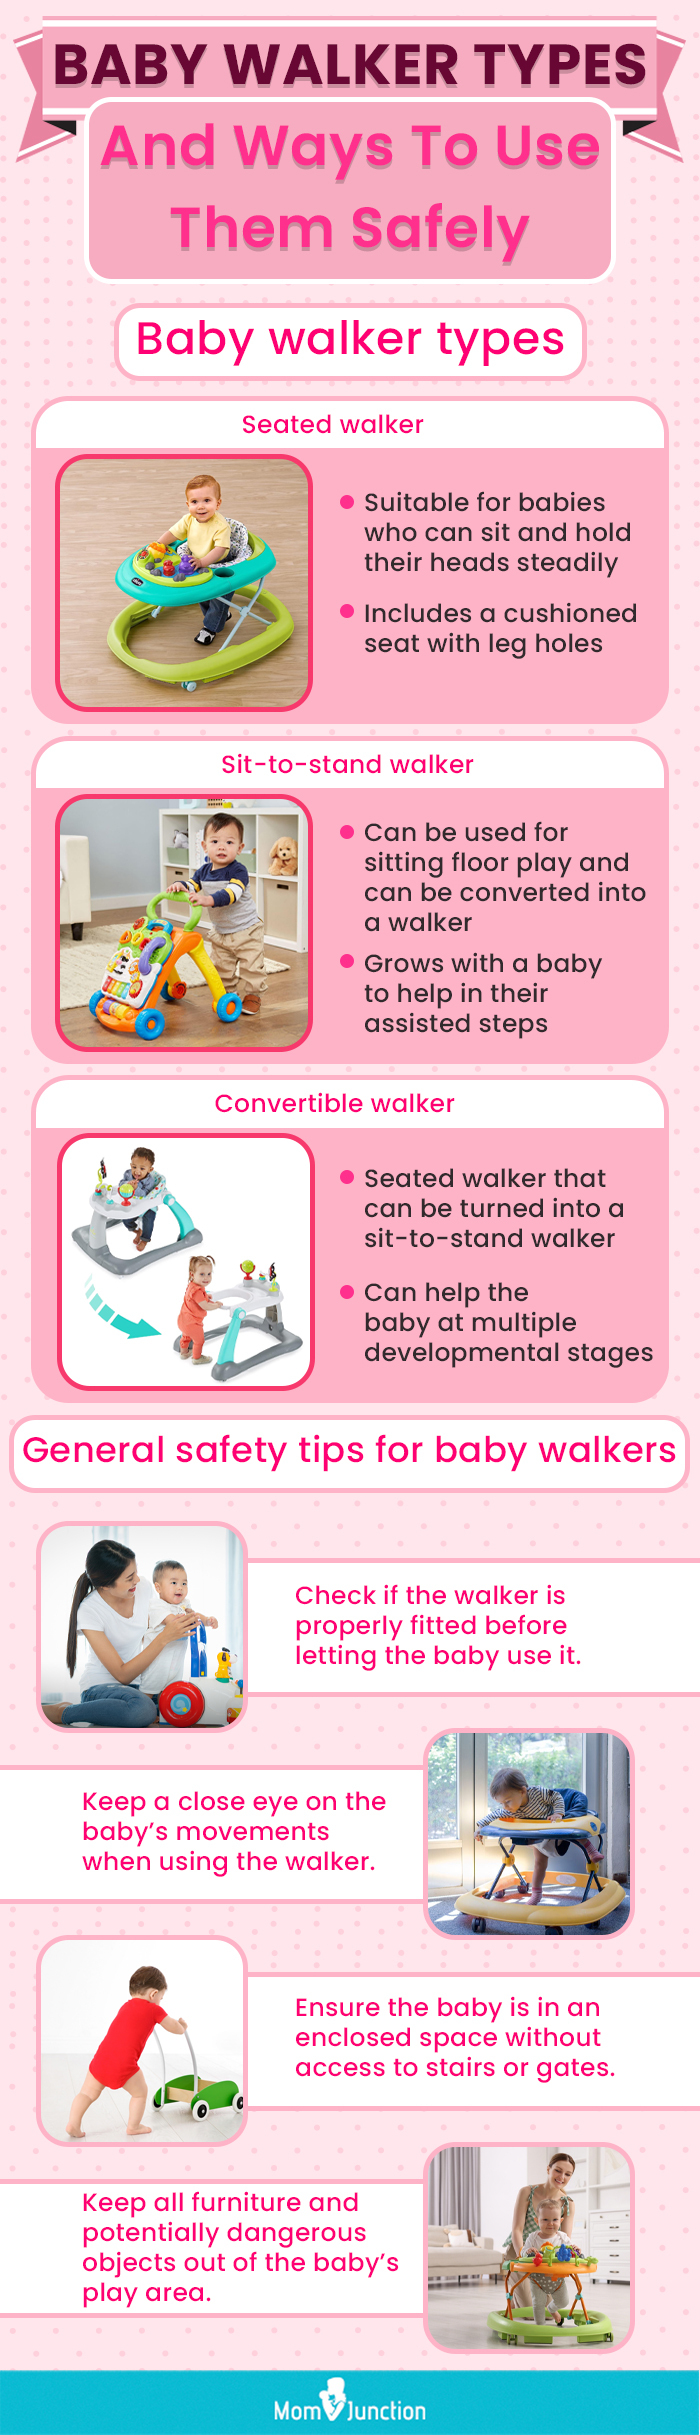 Baby Walker Types And Ways To Use Them Safely (infographic)